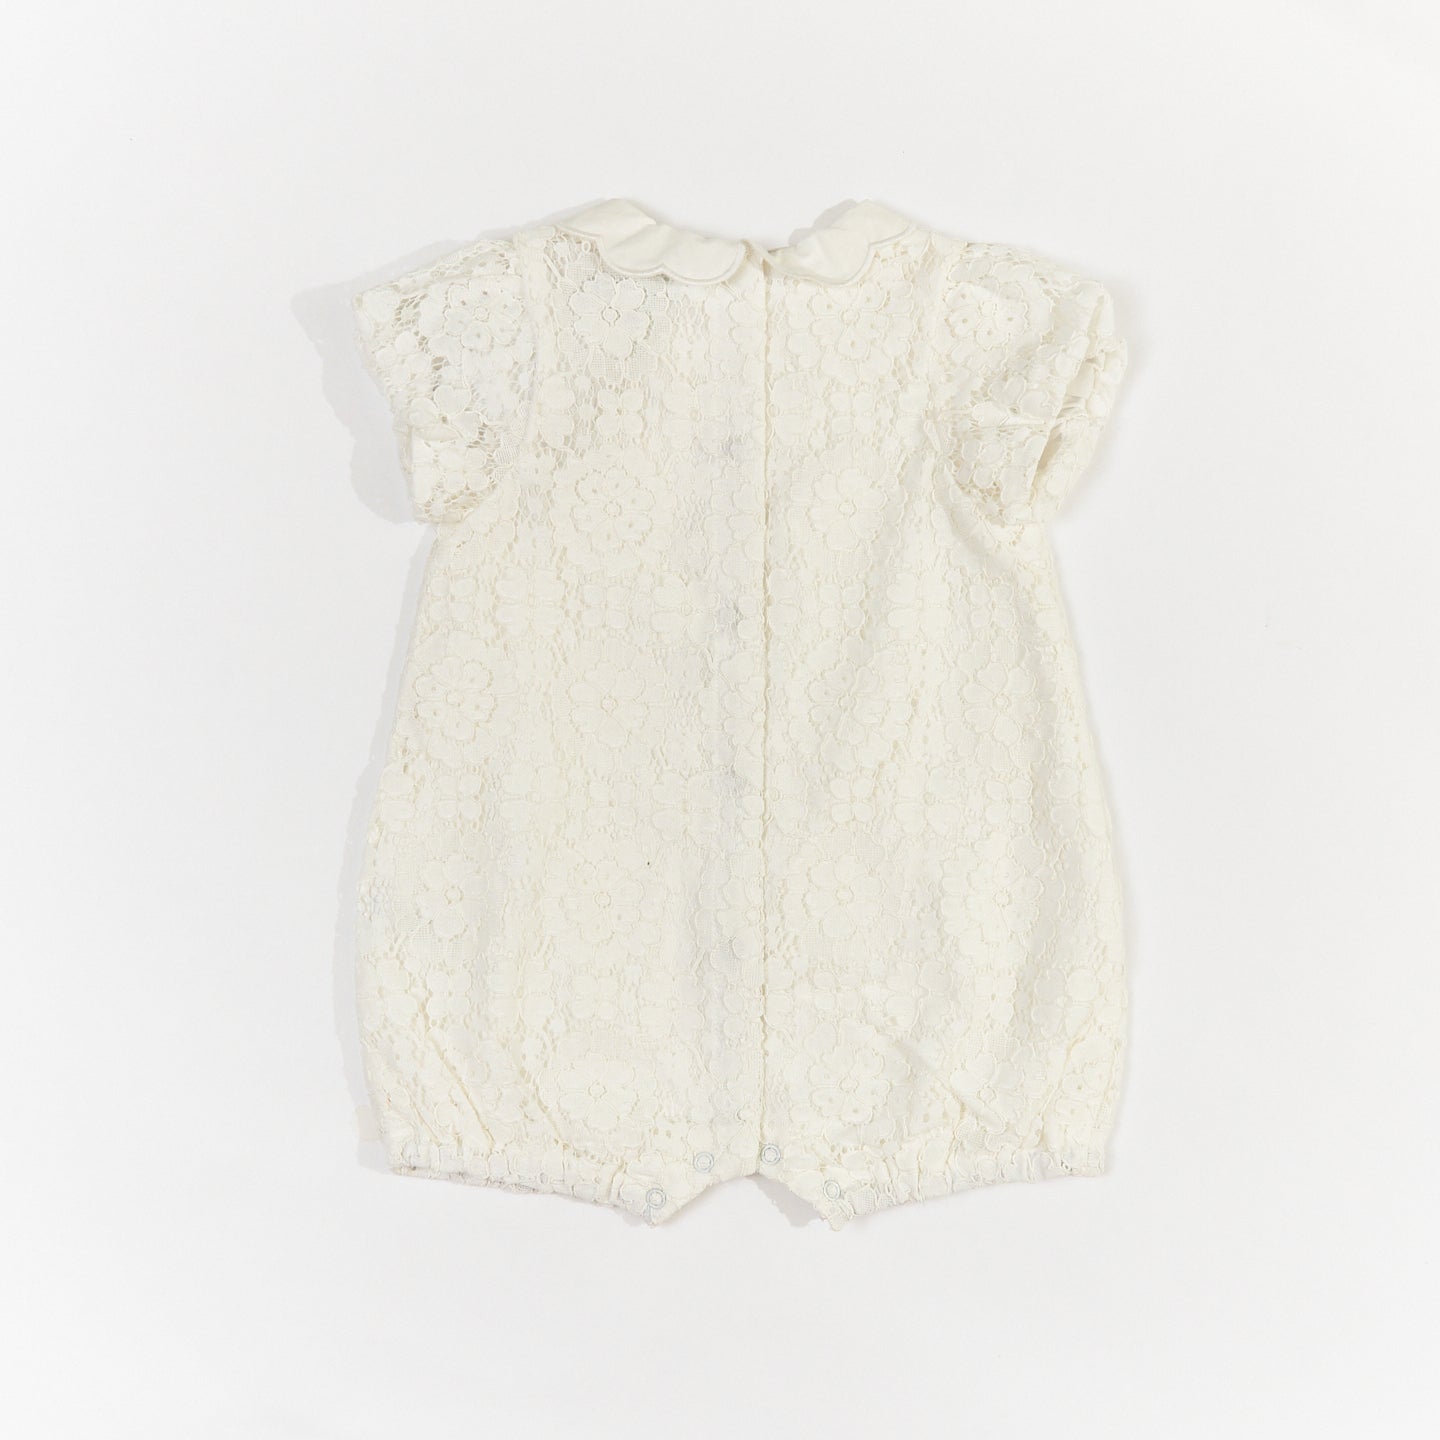 Baby Girl White Lace Romper